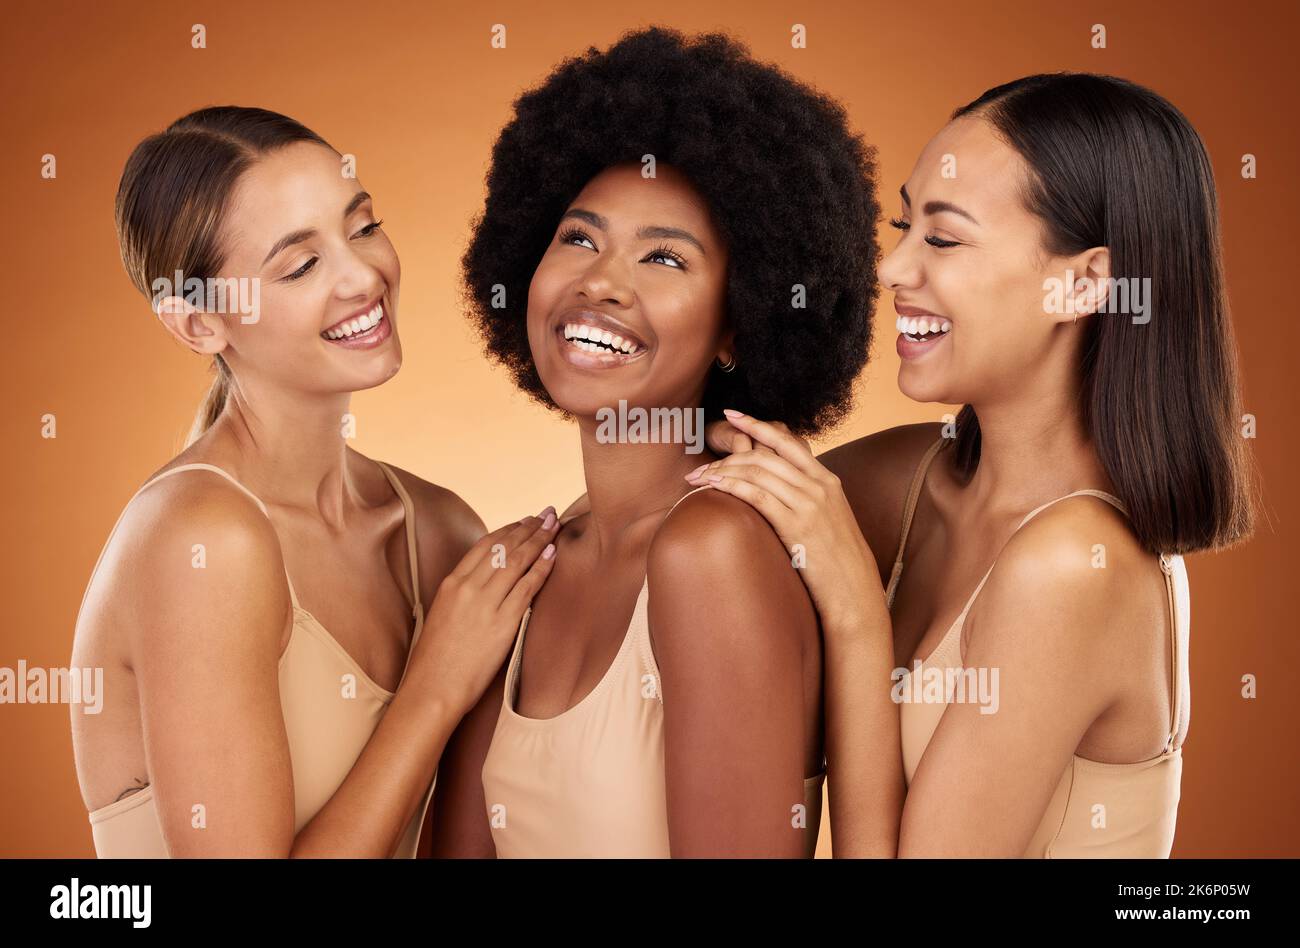 Friends, beauty and women diversity of model group laugh, happy and friendship together. People smile feeling calm, female empowerment and community Stock Photo